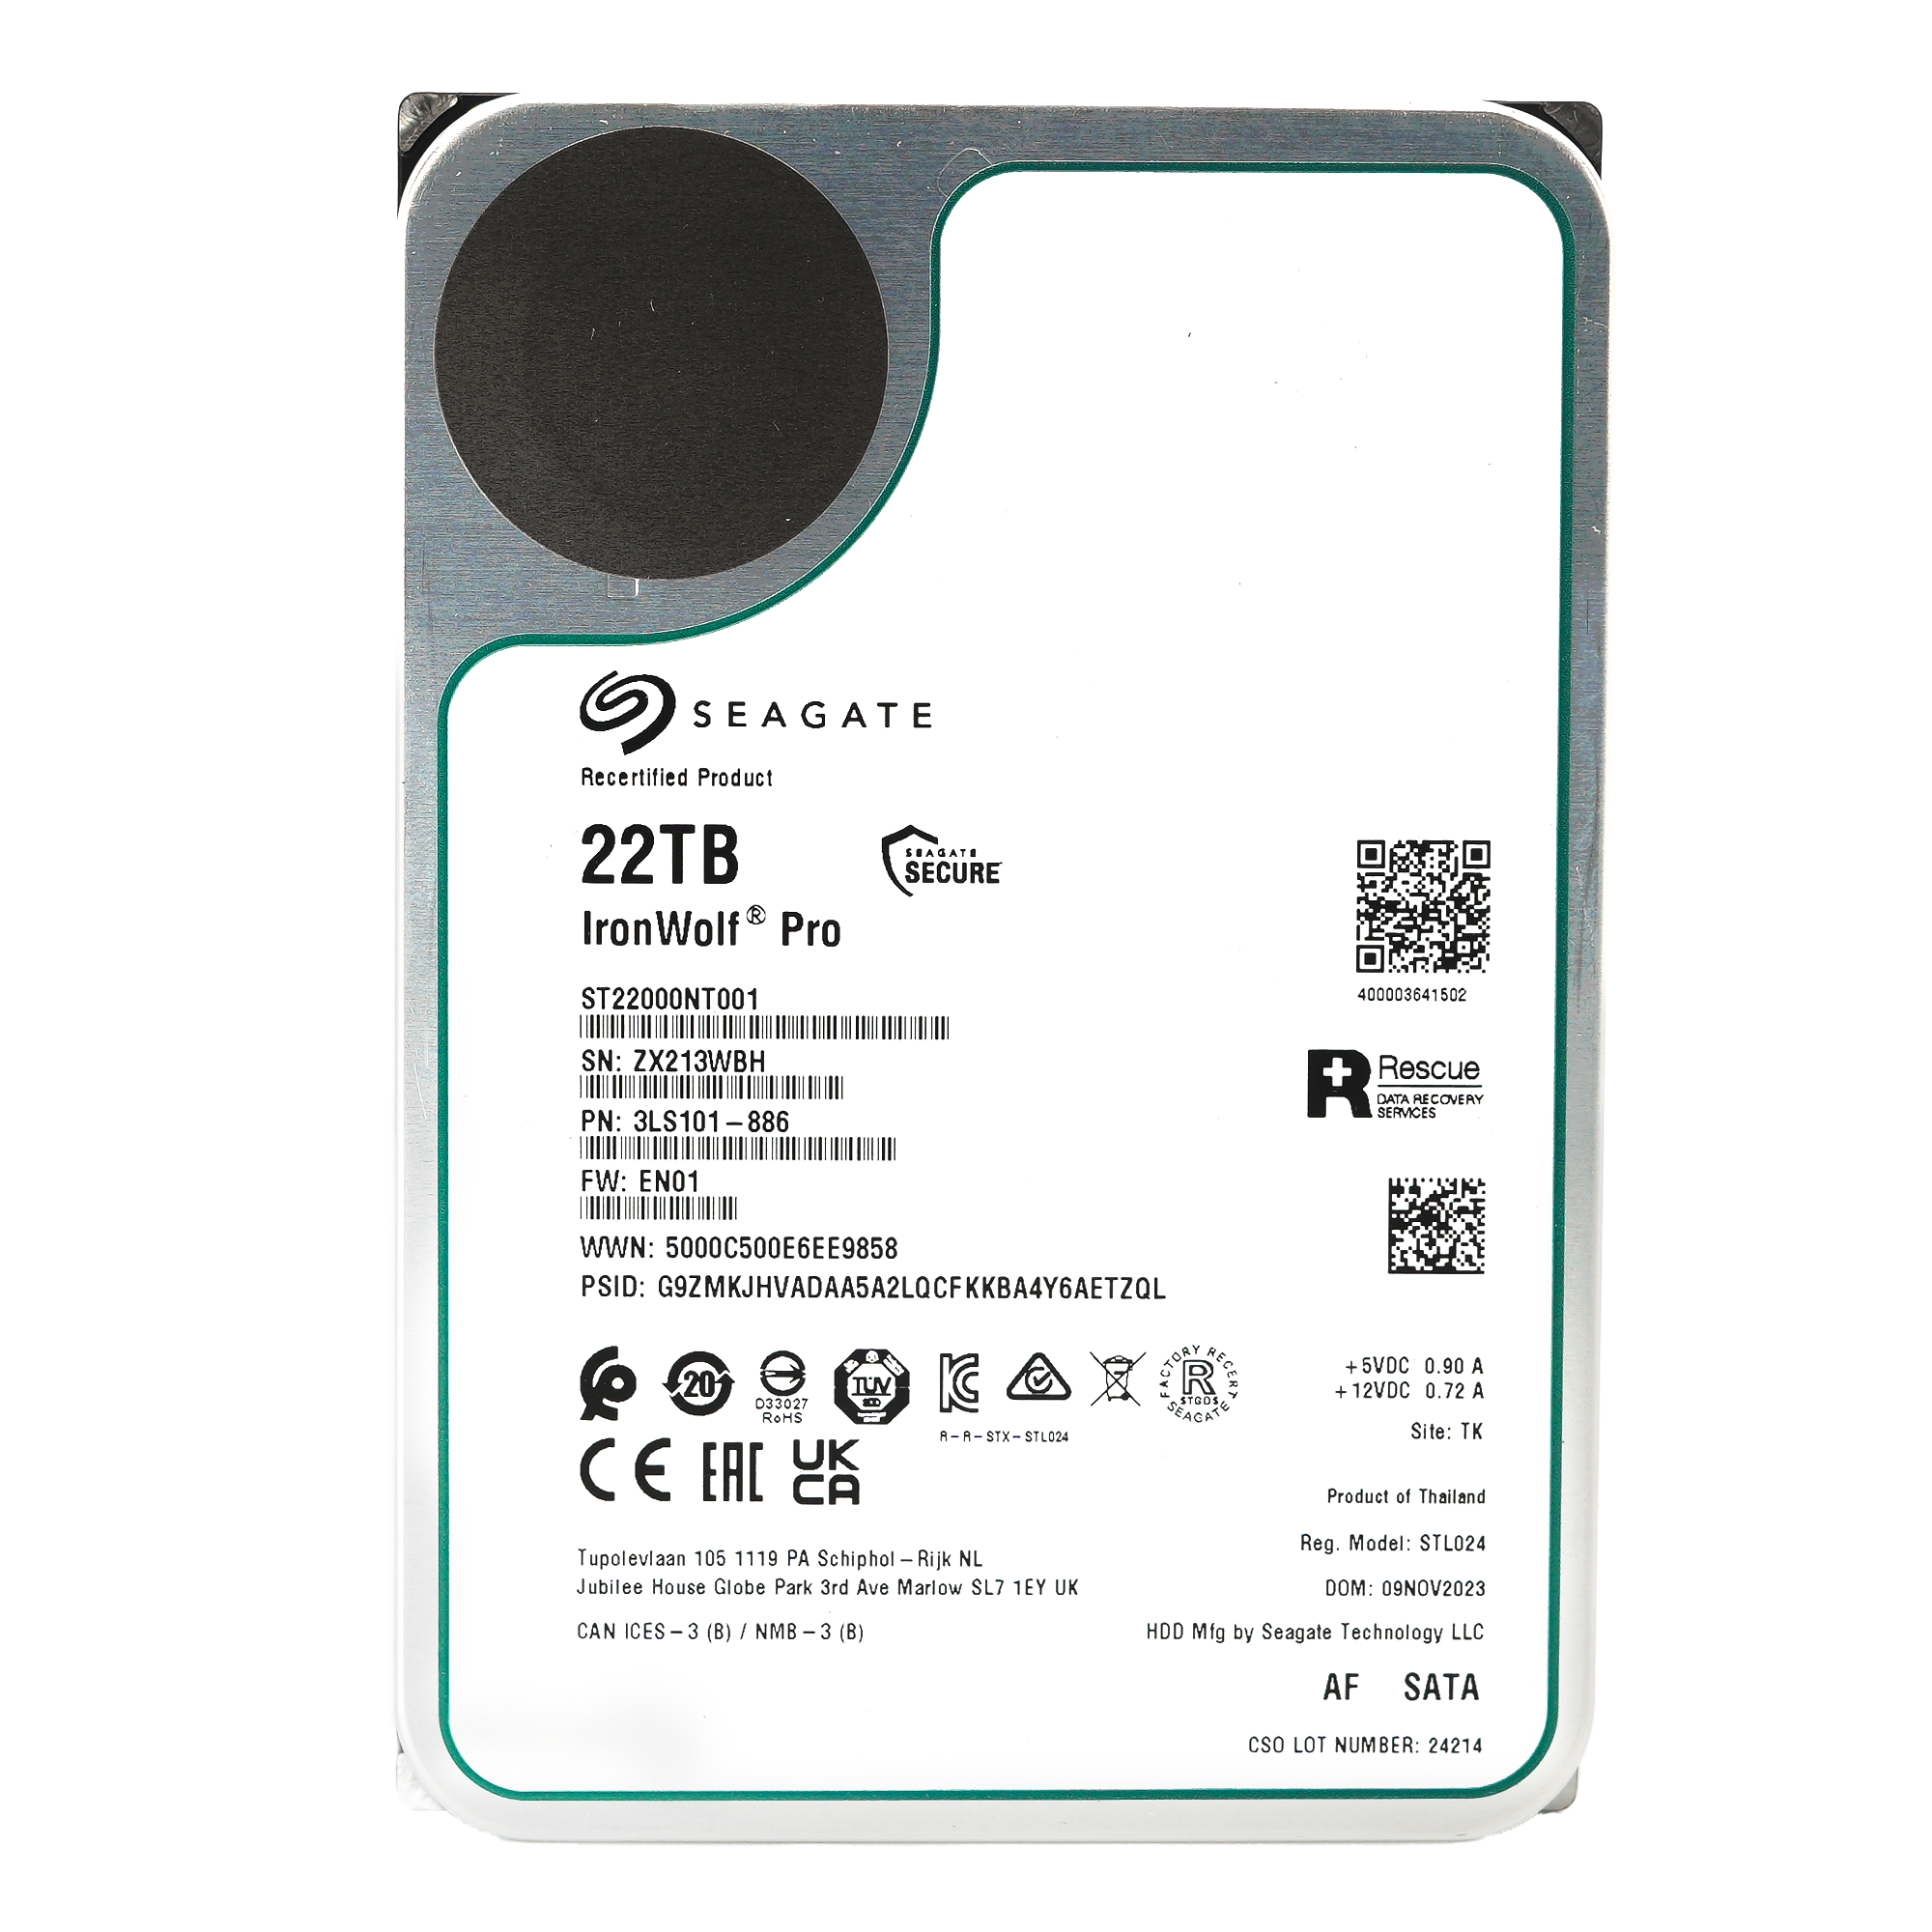 Seagate Ironwolf Pro ST22000NT001 22TB 7.2K RPM SATA 6Gb/s 512e NAS 3.5in Recertified Hard Drive - Front View